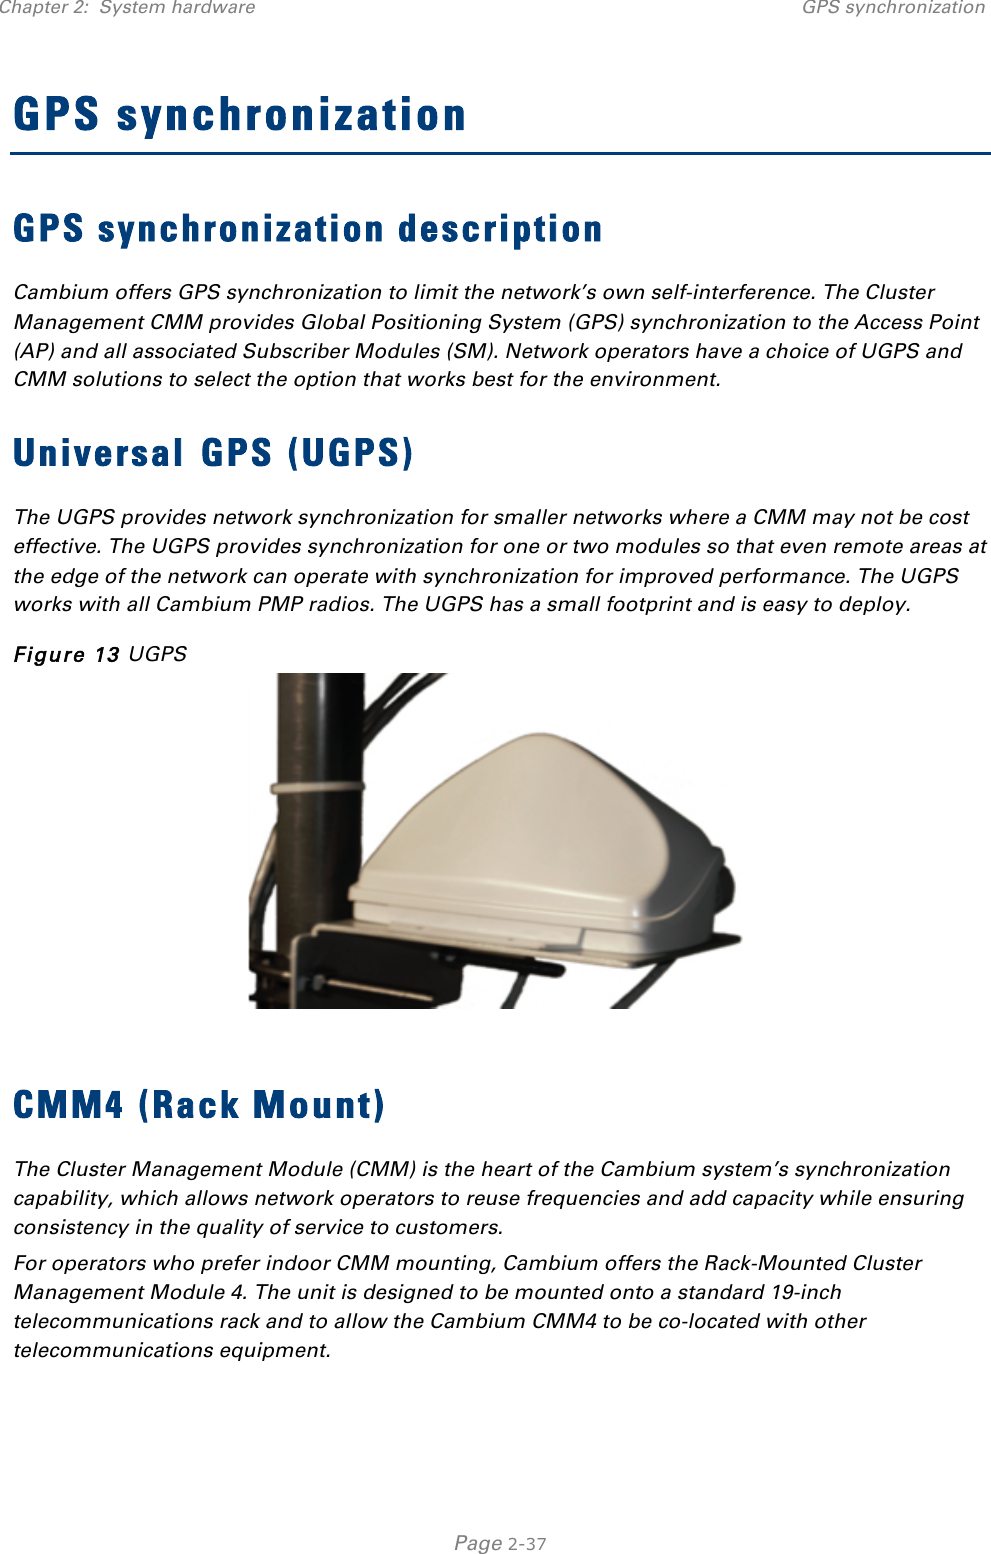 Chapter 2:  System hardware GPS synchronization   Page 2-37 GPS synchronization GPS synchronization description Cambium offers GPS synchronization to limit the network’s own self-interference. The Cluster Management CMM provides Global Positioning System (GPS) synchronization to the Access Point (AP) and all associated Subscriber Modules (SM). Network operators have a choice of UGPS and CMM solutions to select the option that works best for the environment. Universal GPS (UGPS) The UGPS provides network synchronization for smaller networks where a CMM may not be cost effective. The UGPS provides synchronization for one or two modules so that even remote areas at the edge of the network can operate with synchronization for improved performance. The UGPS works with all Cambium PMP radios. The UGPS has a small footprint and is easy to deploy. Figure 13 UGPS   CMM4 (Rack Mount) The Cluster Management Module (CMM) is the heart of the Cambium system’s synchronization capability, which allows network operators to reuse frequencies and add capacity while ensuring consistency in the quality of service to customers.  For operators who prefer indoor CMM mounting, Cambium offers the Rack-Mounted Cluster Management Module 4. The unit is designed to be mounted onto a standard 19-inch telecommunications rack and to allow the Cambium CMM4 to be co-located with other telecommunications equipment. 